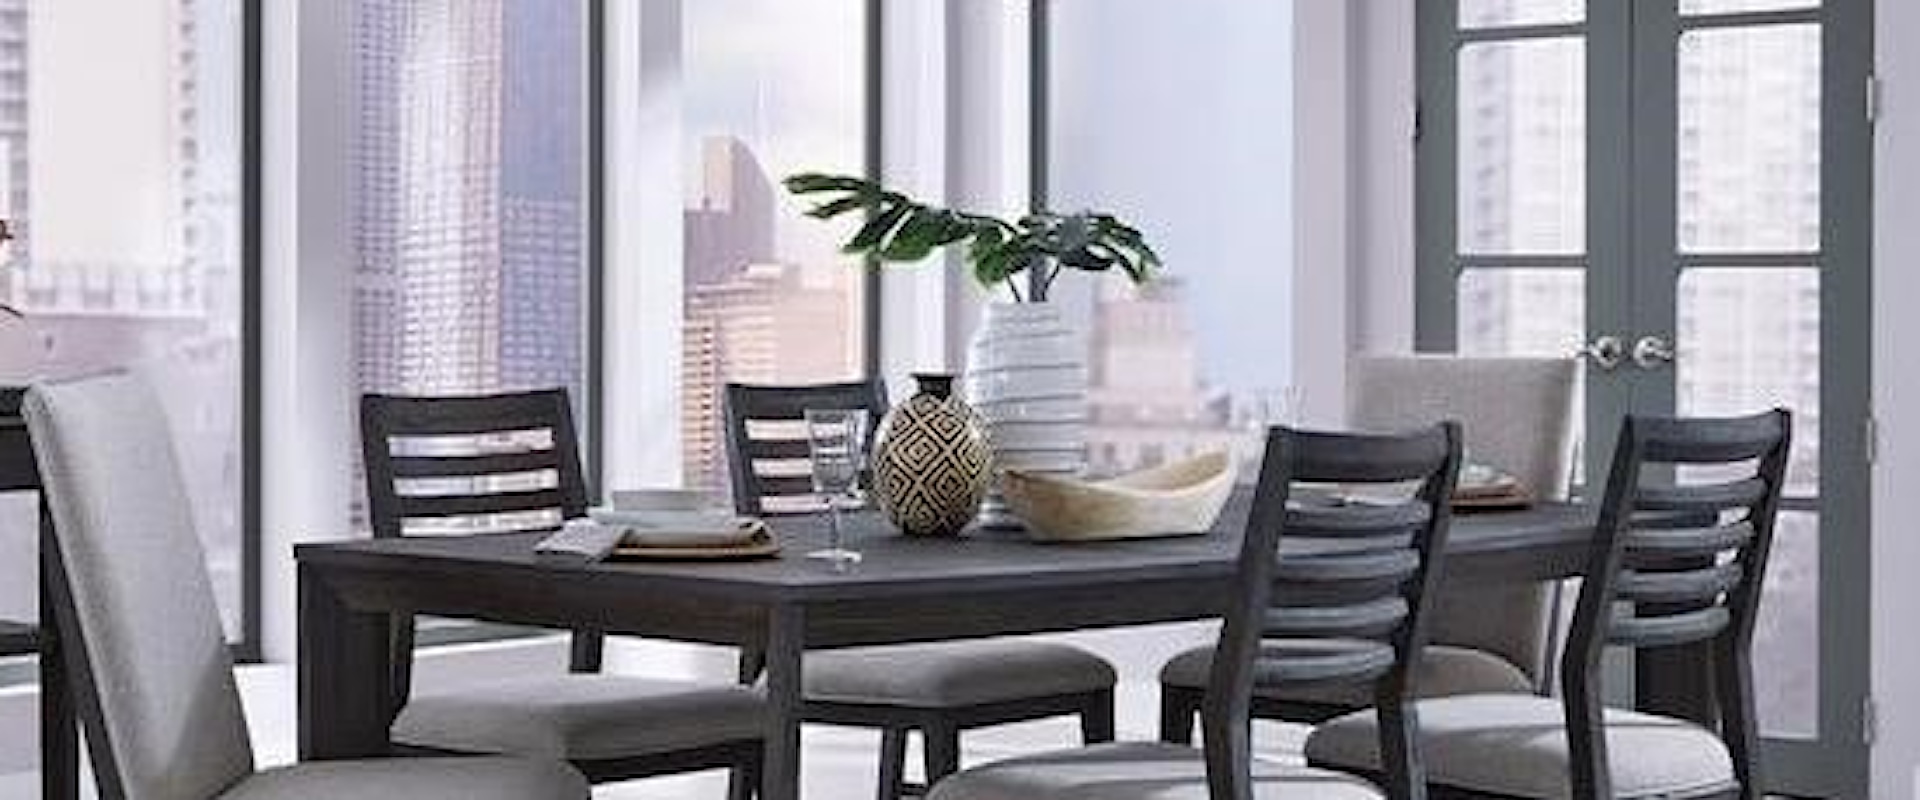 7-Piece Dining Set with Rect. Table, Ladderback Chairs, Upholstered Chairs